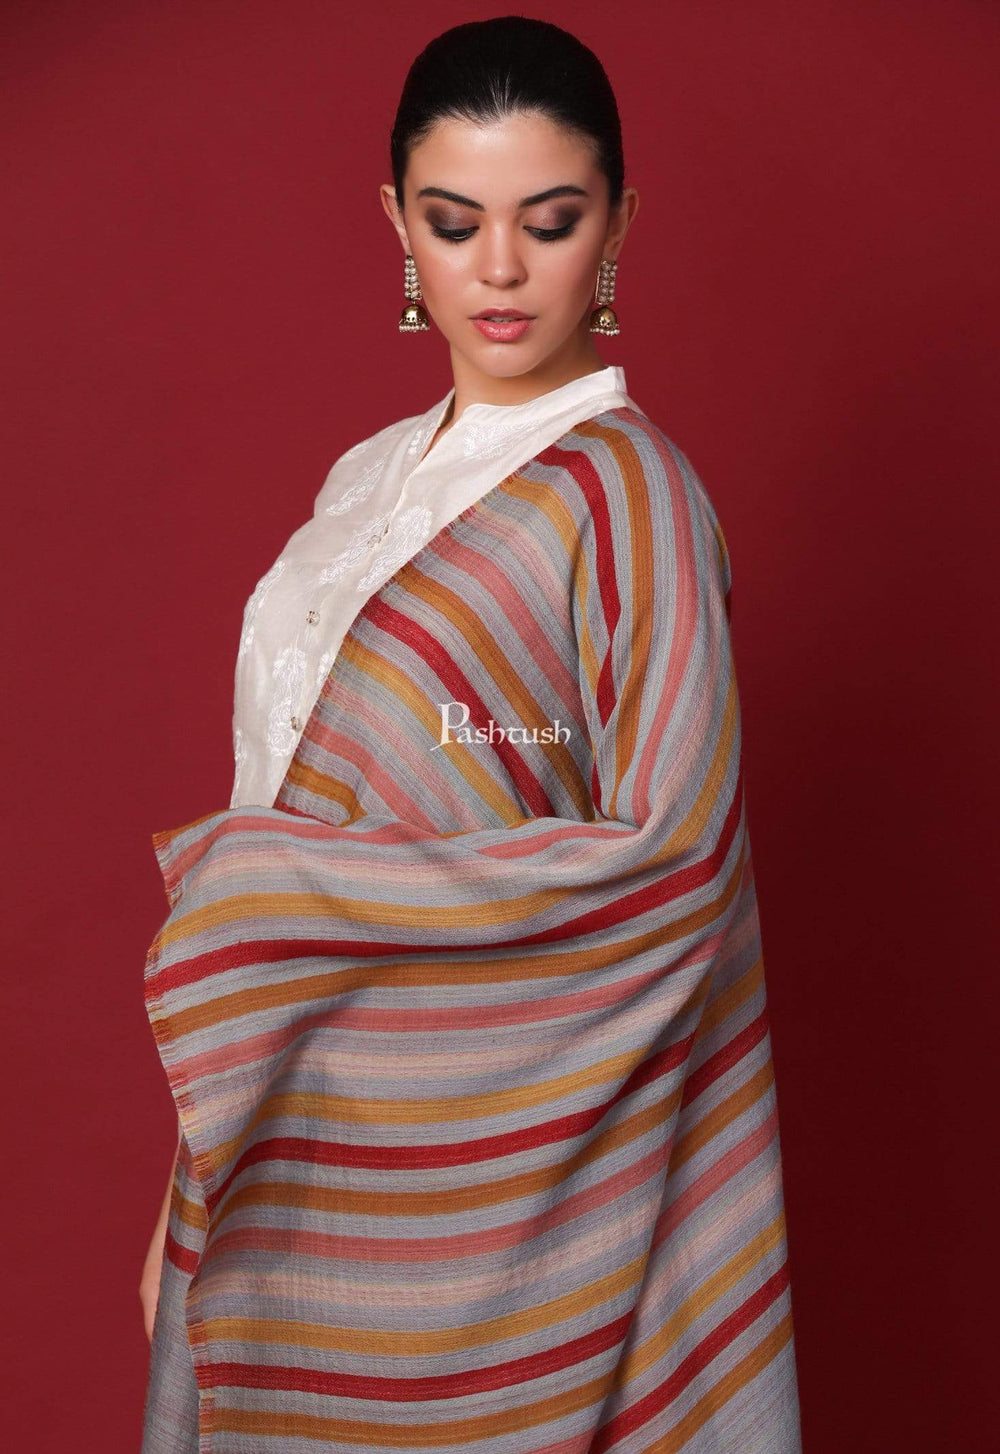 Pashtush Store Stole Pashtush Womens Cashmere and Wool Scarf, Sunkissed Hues